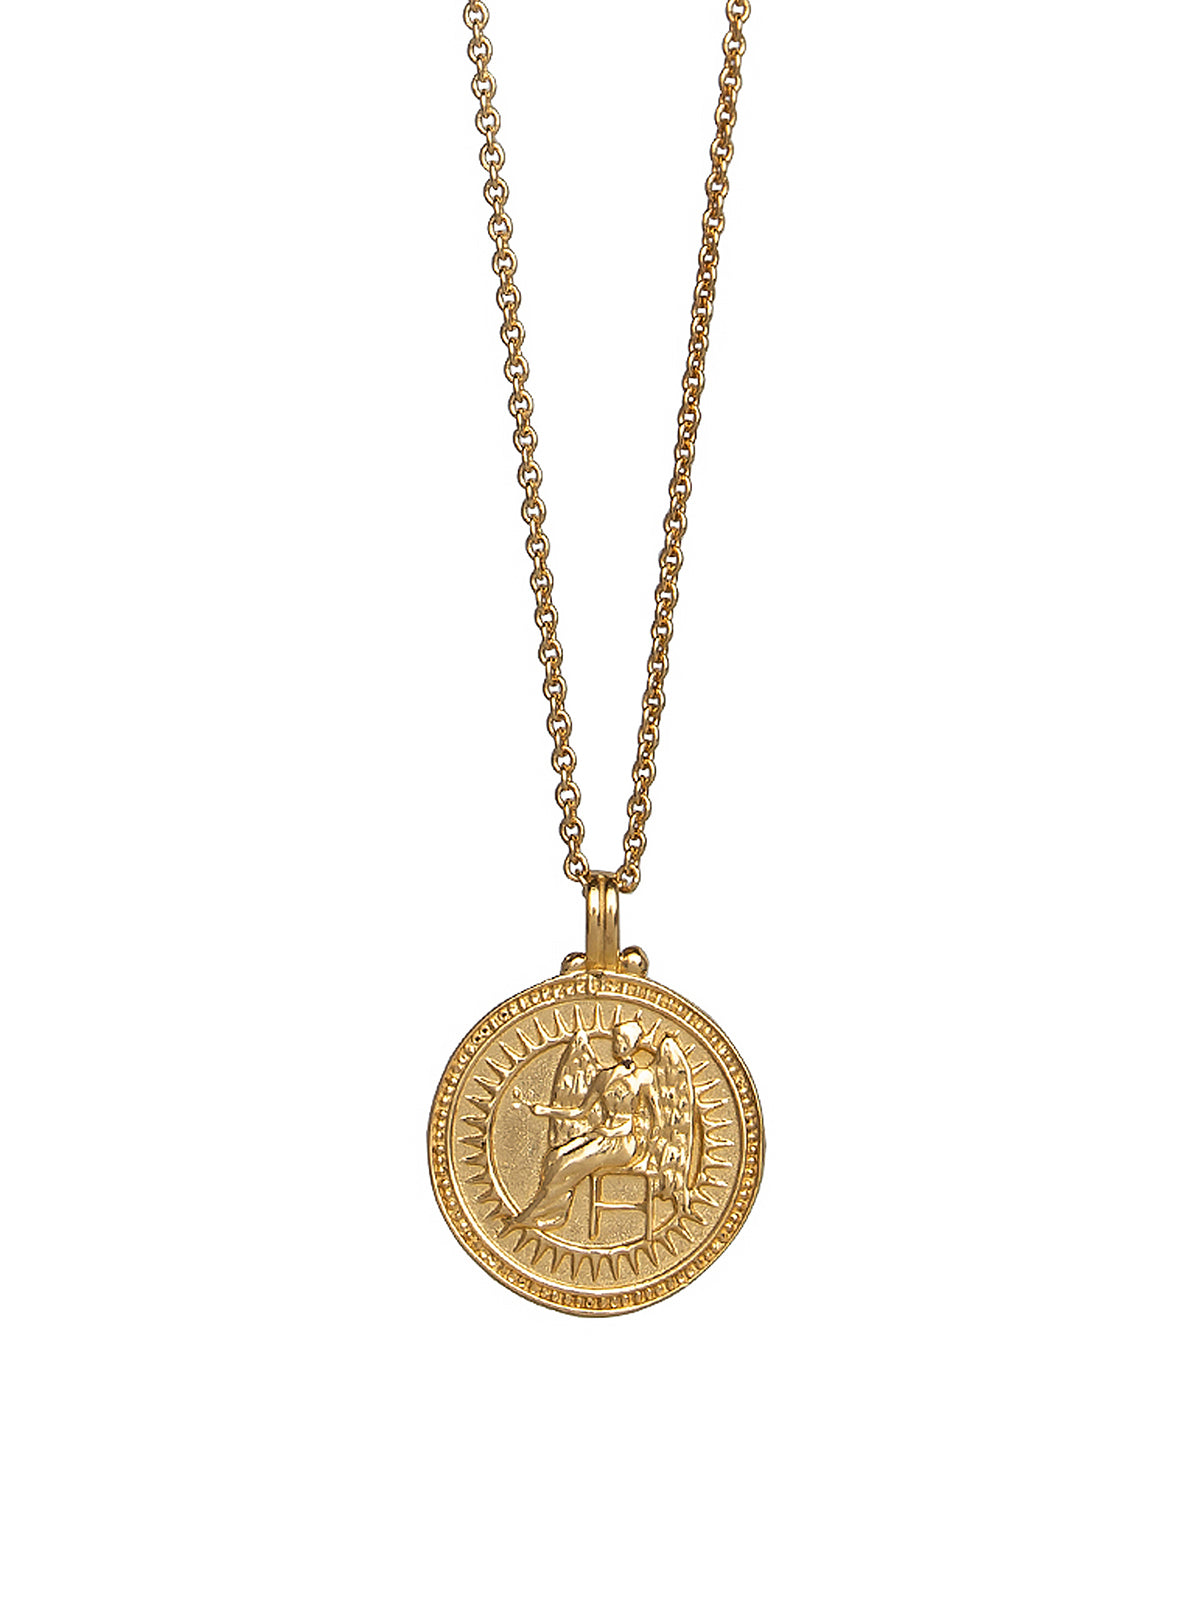 Virgo. 18ct Solid Gold Star Sign Necklace. The pendant features an Evil Eye on the back to ward off any naughty behavior aimed at you, Our logo and the 750 Hallmark for 18ct Gold.